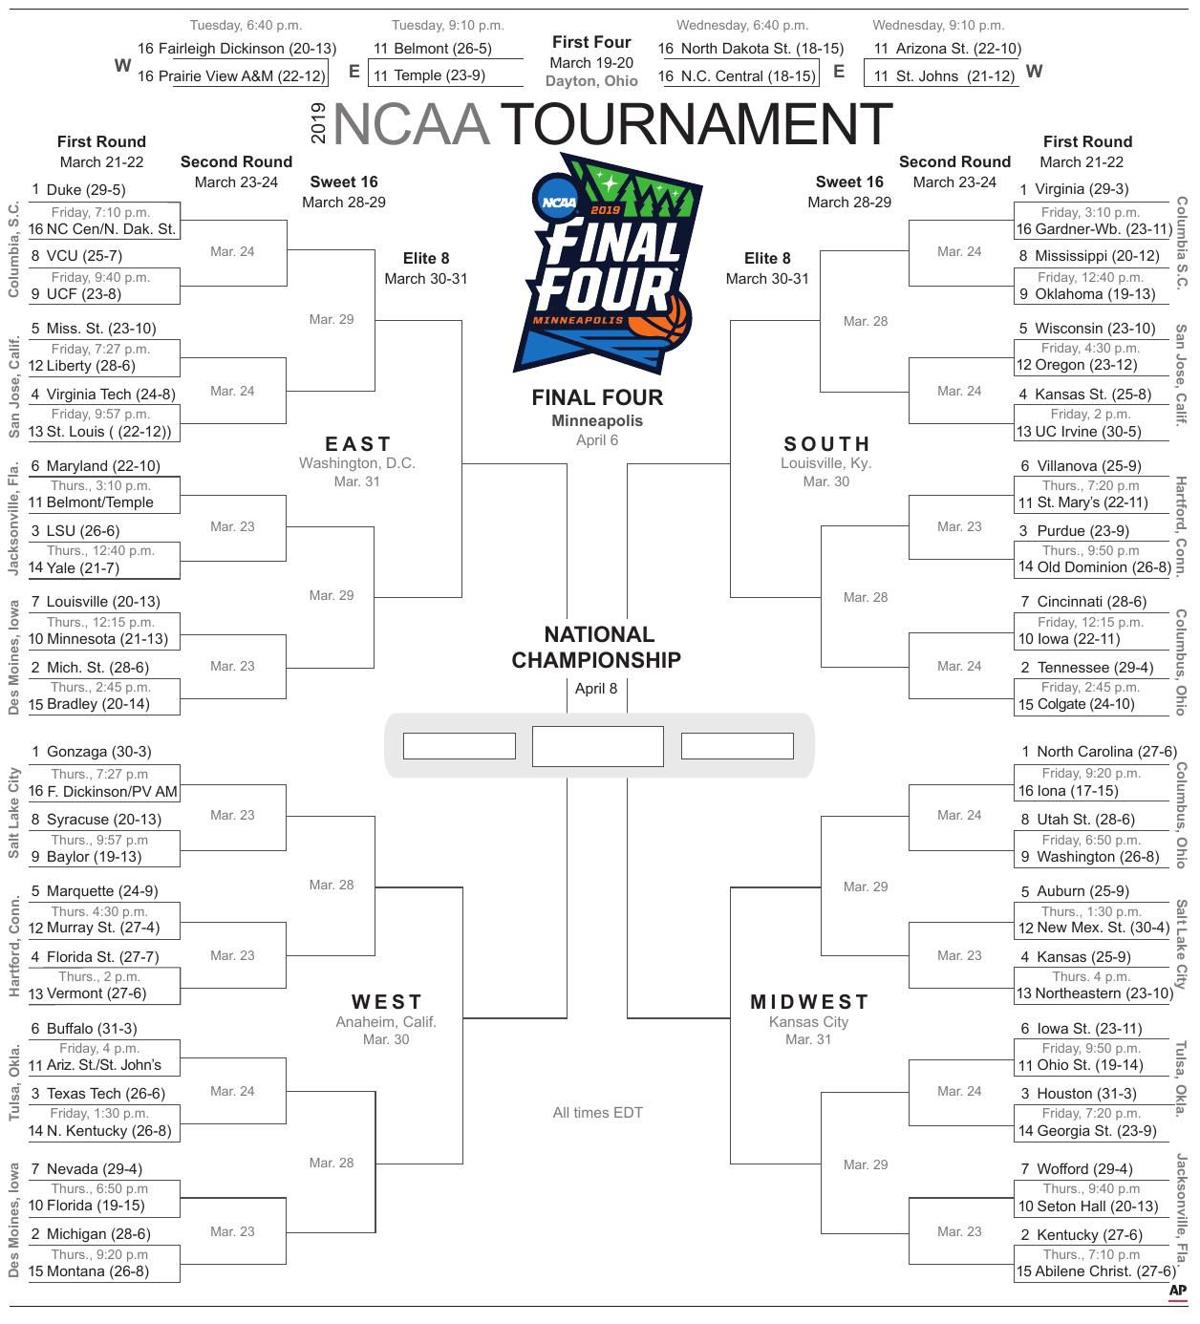 The NCAA men's March Madness bracket Local Sports